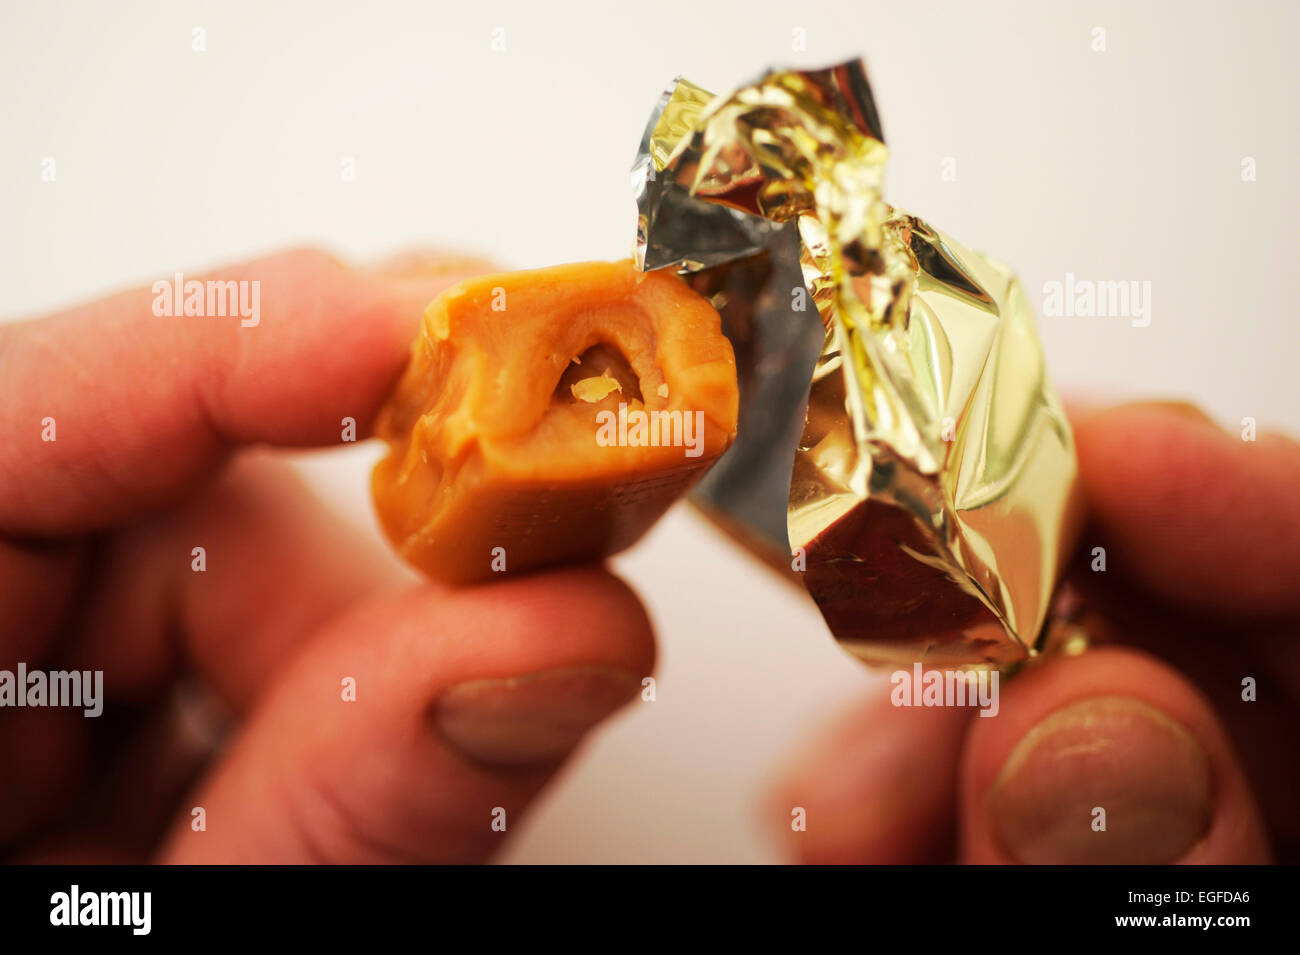 Male Unwrapping a Toffee Sweet Stock Photo